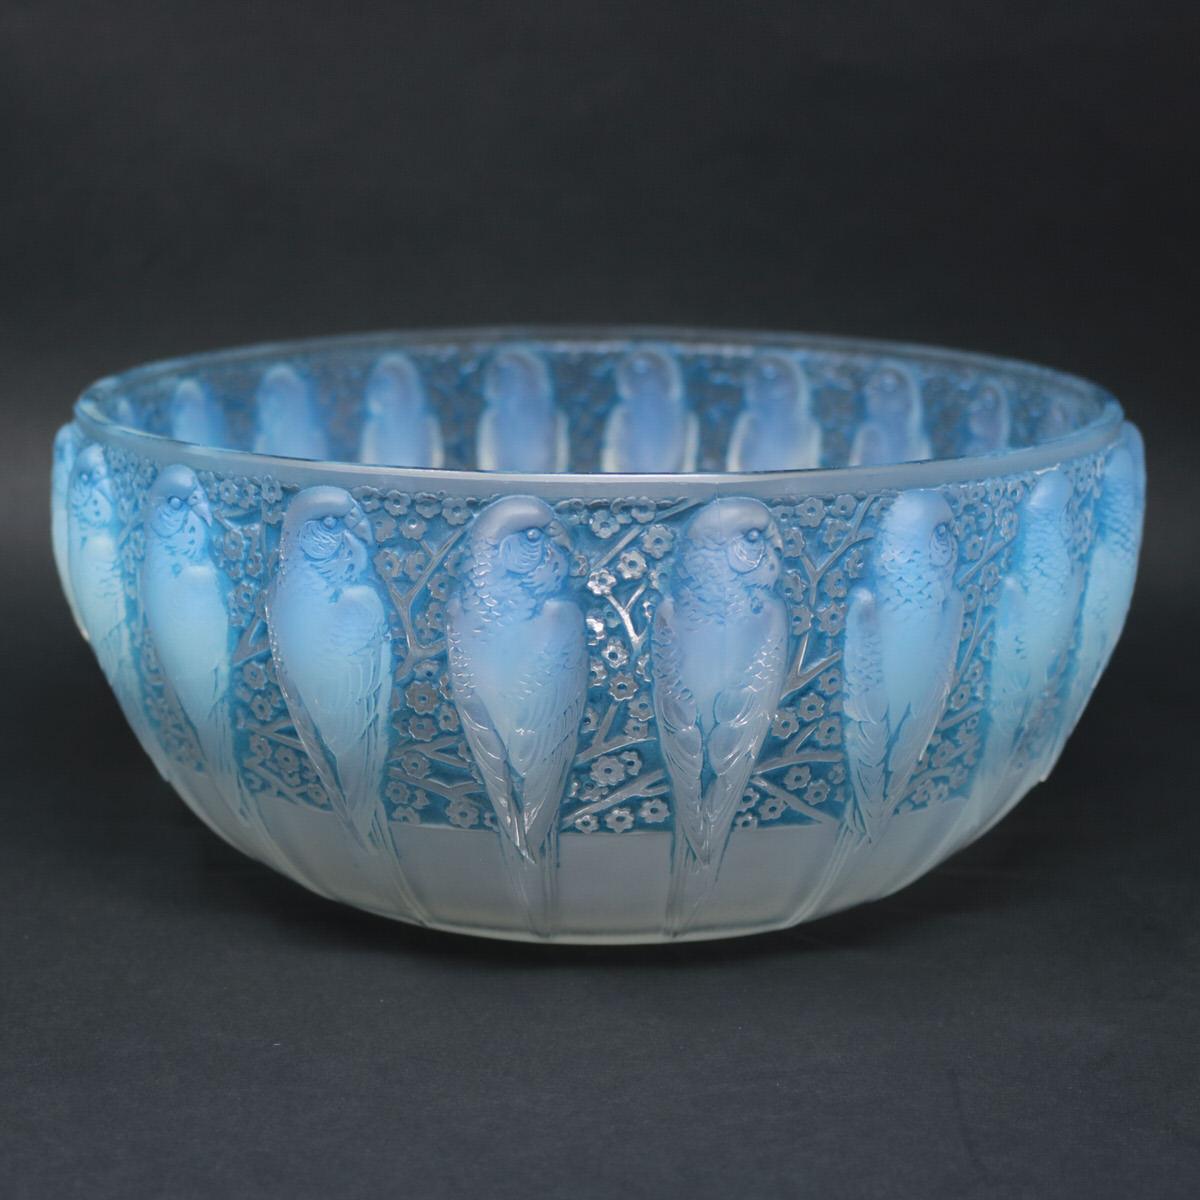 Rene Lalique opalescent glass 'Perruches' bowl. Blue stain details. This pattern features parakeets around the outside, with flowers in-between. Stenciled makers mark, 'R. LALIQUE FRANCE' to the underside. Book reference: Marcilhac 419.